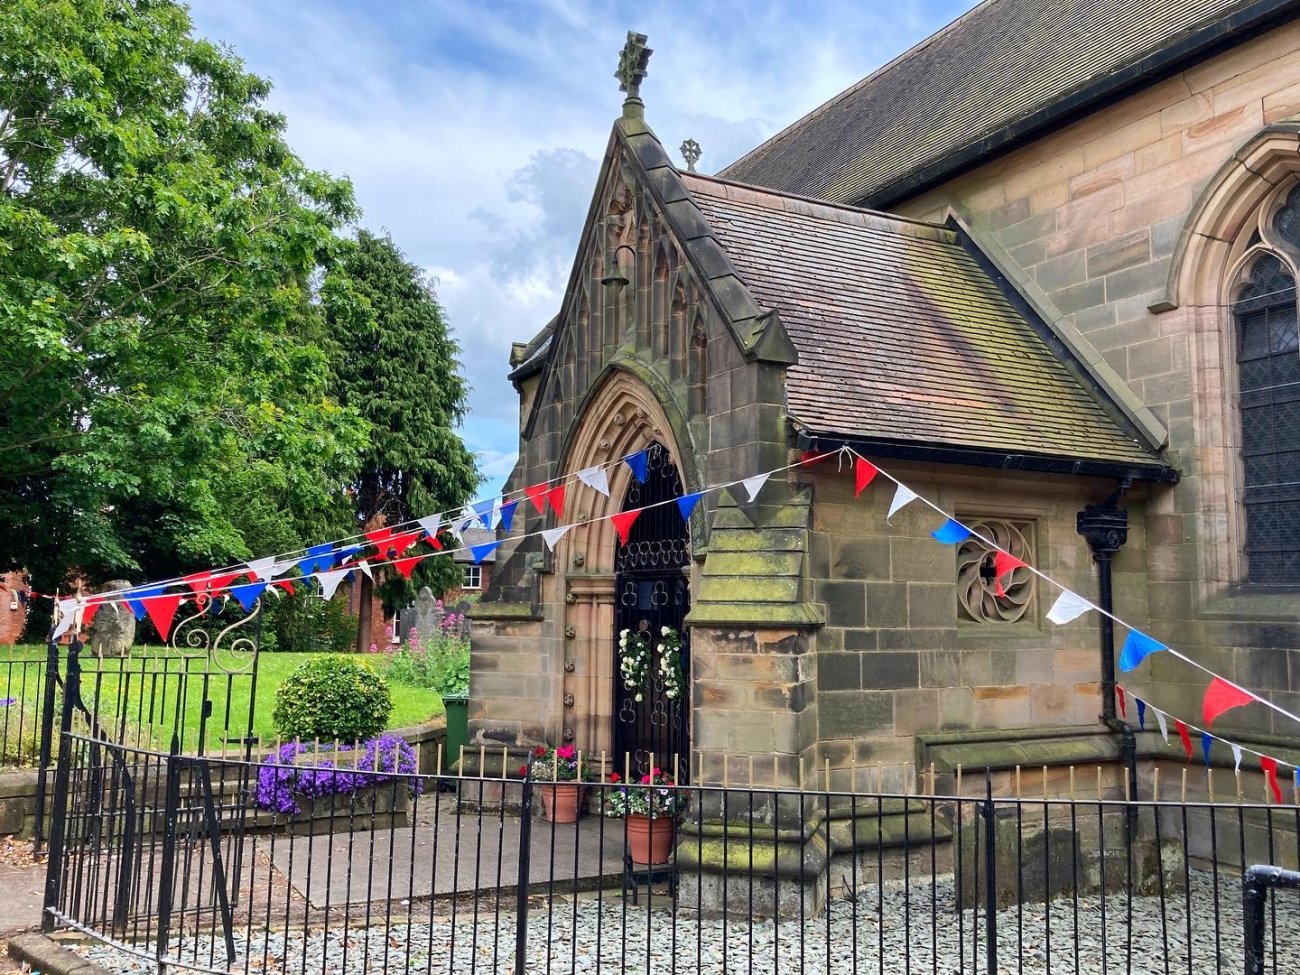 Photograph of St Werburgh's decorated for the Queen's Platinum Jubilee